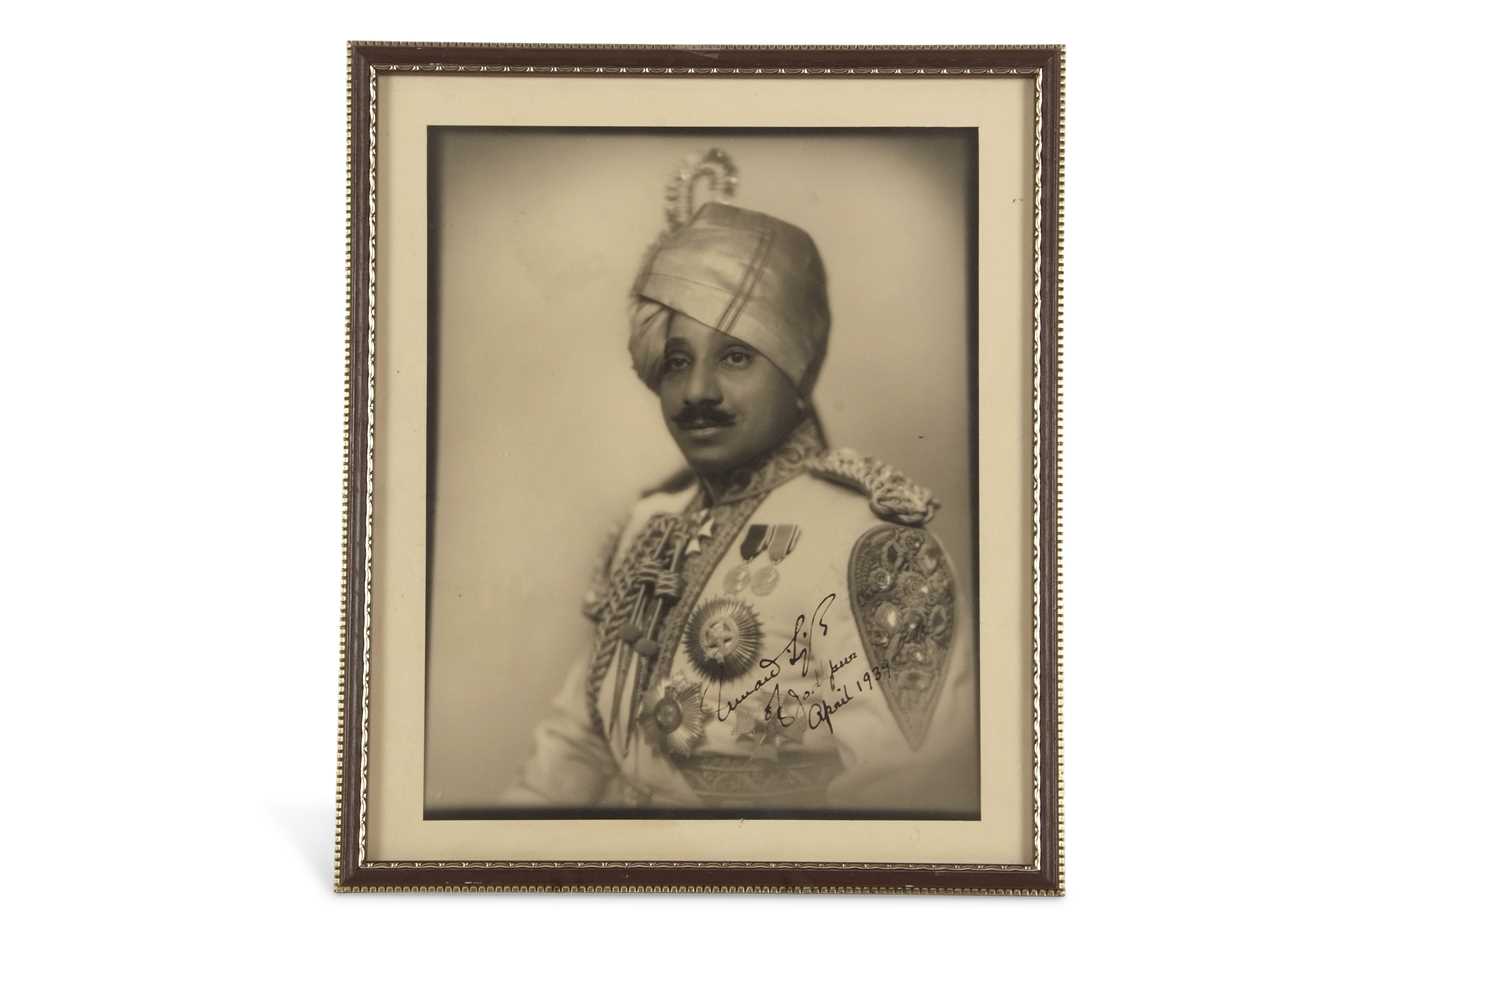 A framed signed photograph of Umaid Singh Maharaja of Jodhpur State between 1918 and 1947, the